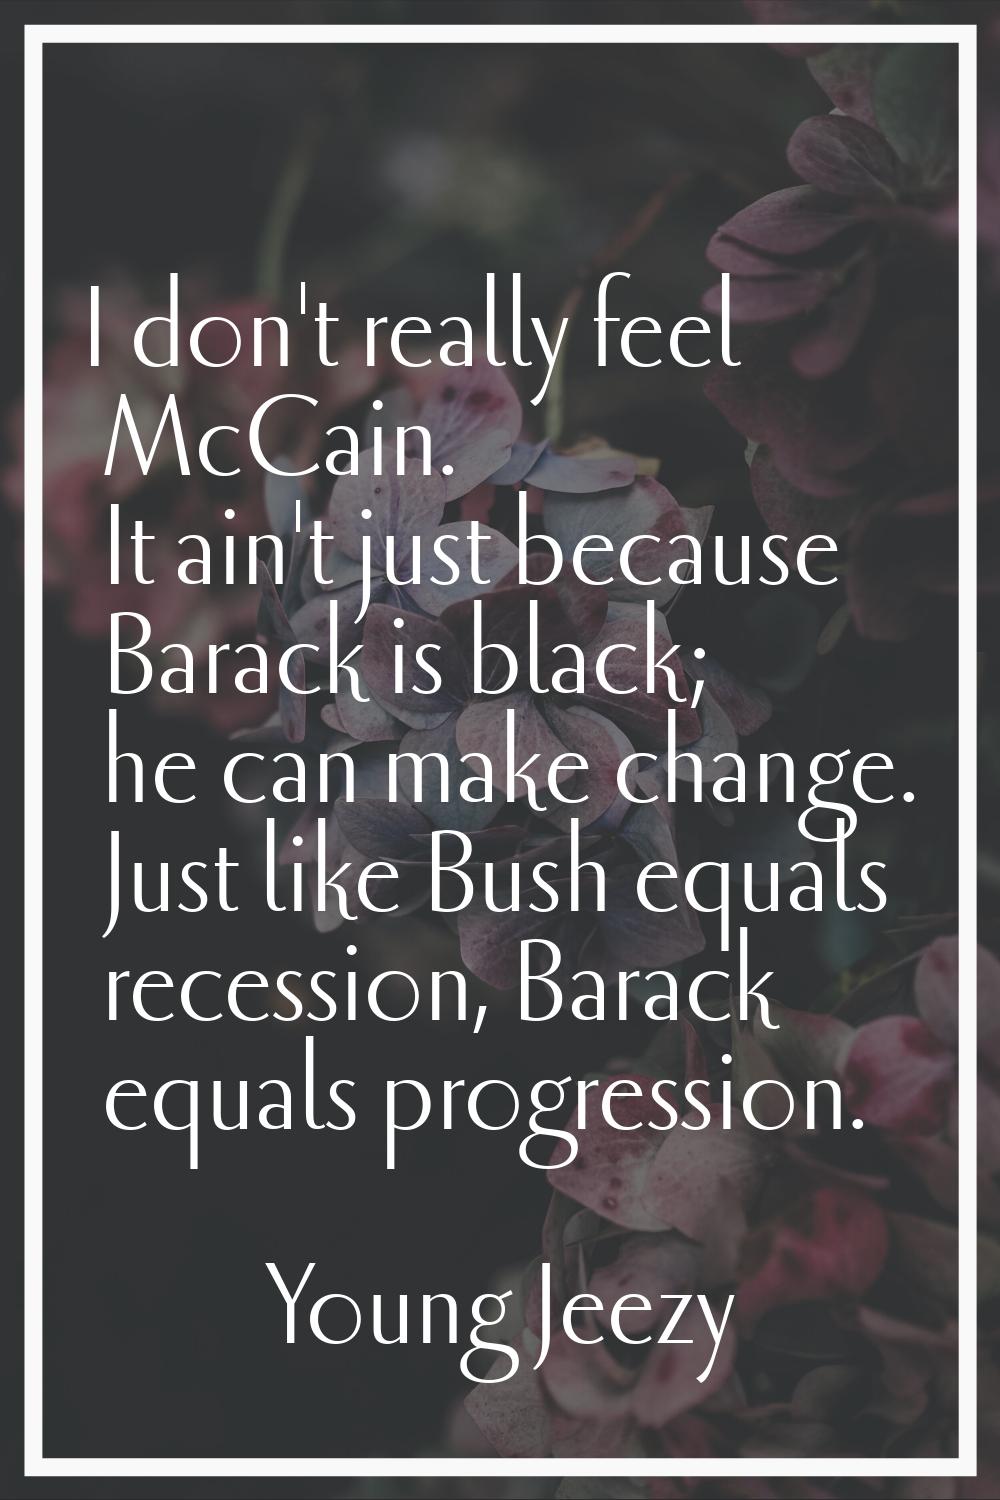 I don't really feel McCain. It ain't just because Barack is black; he can make change. Just like Bu